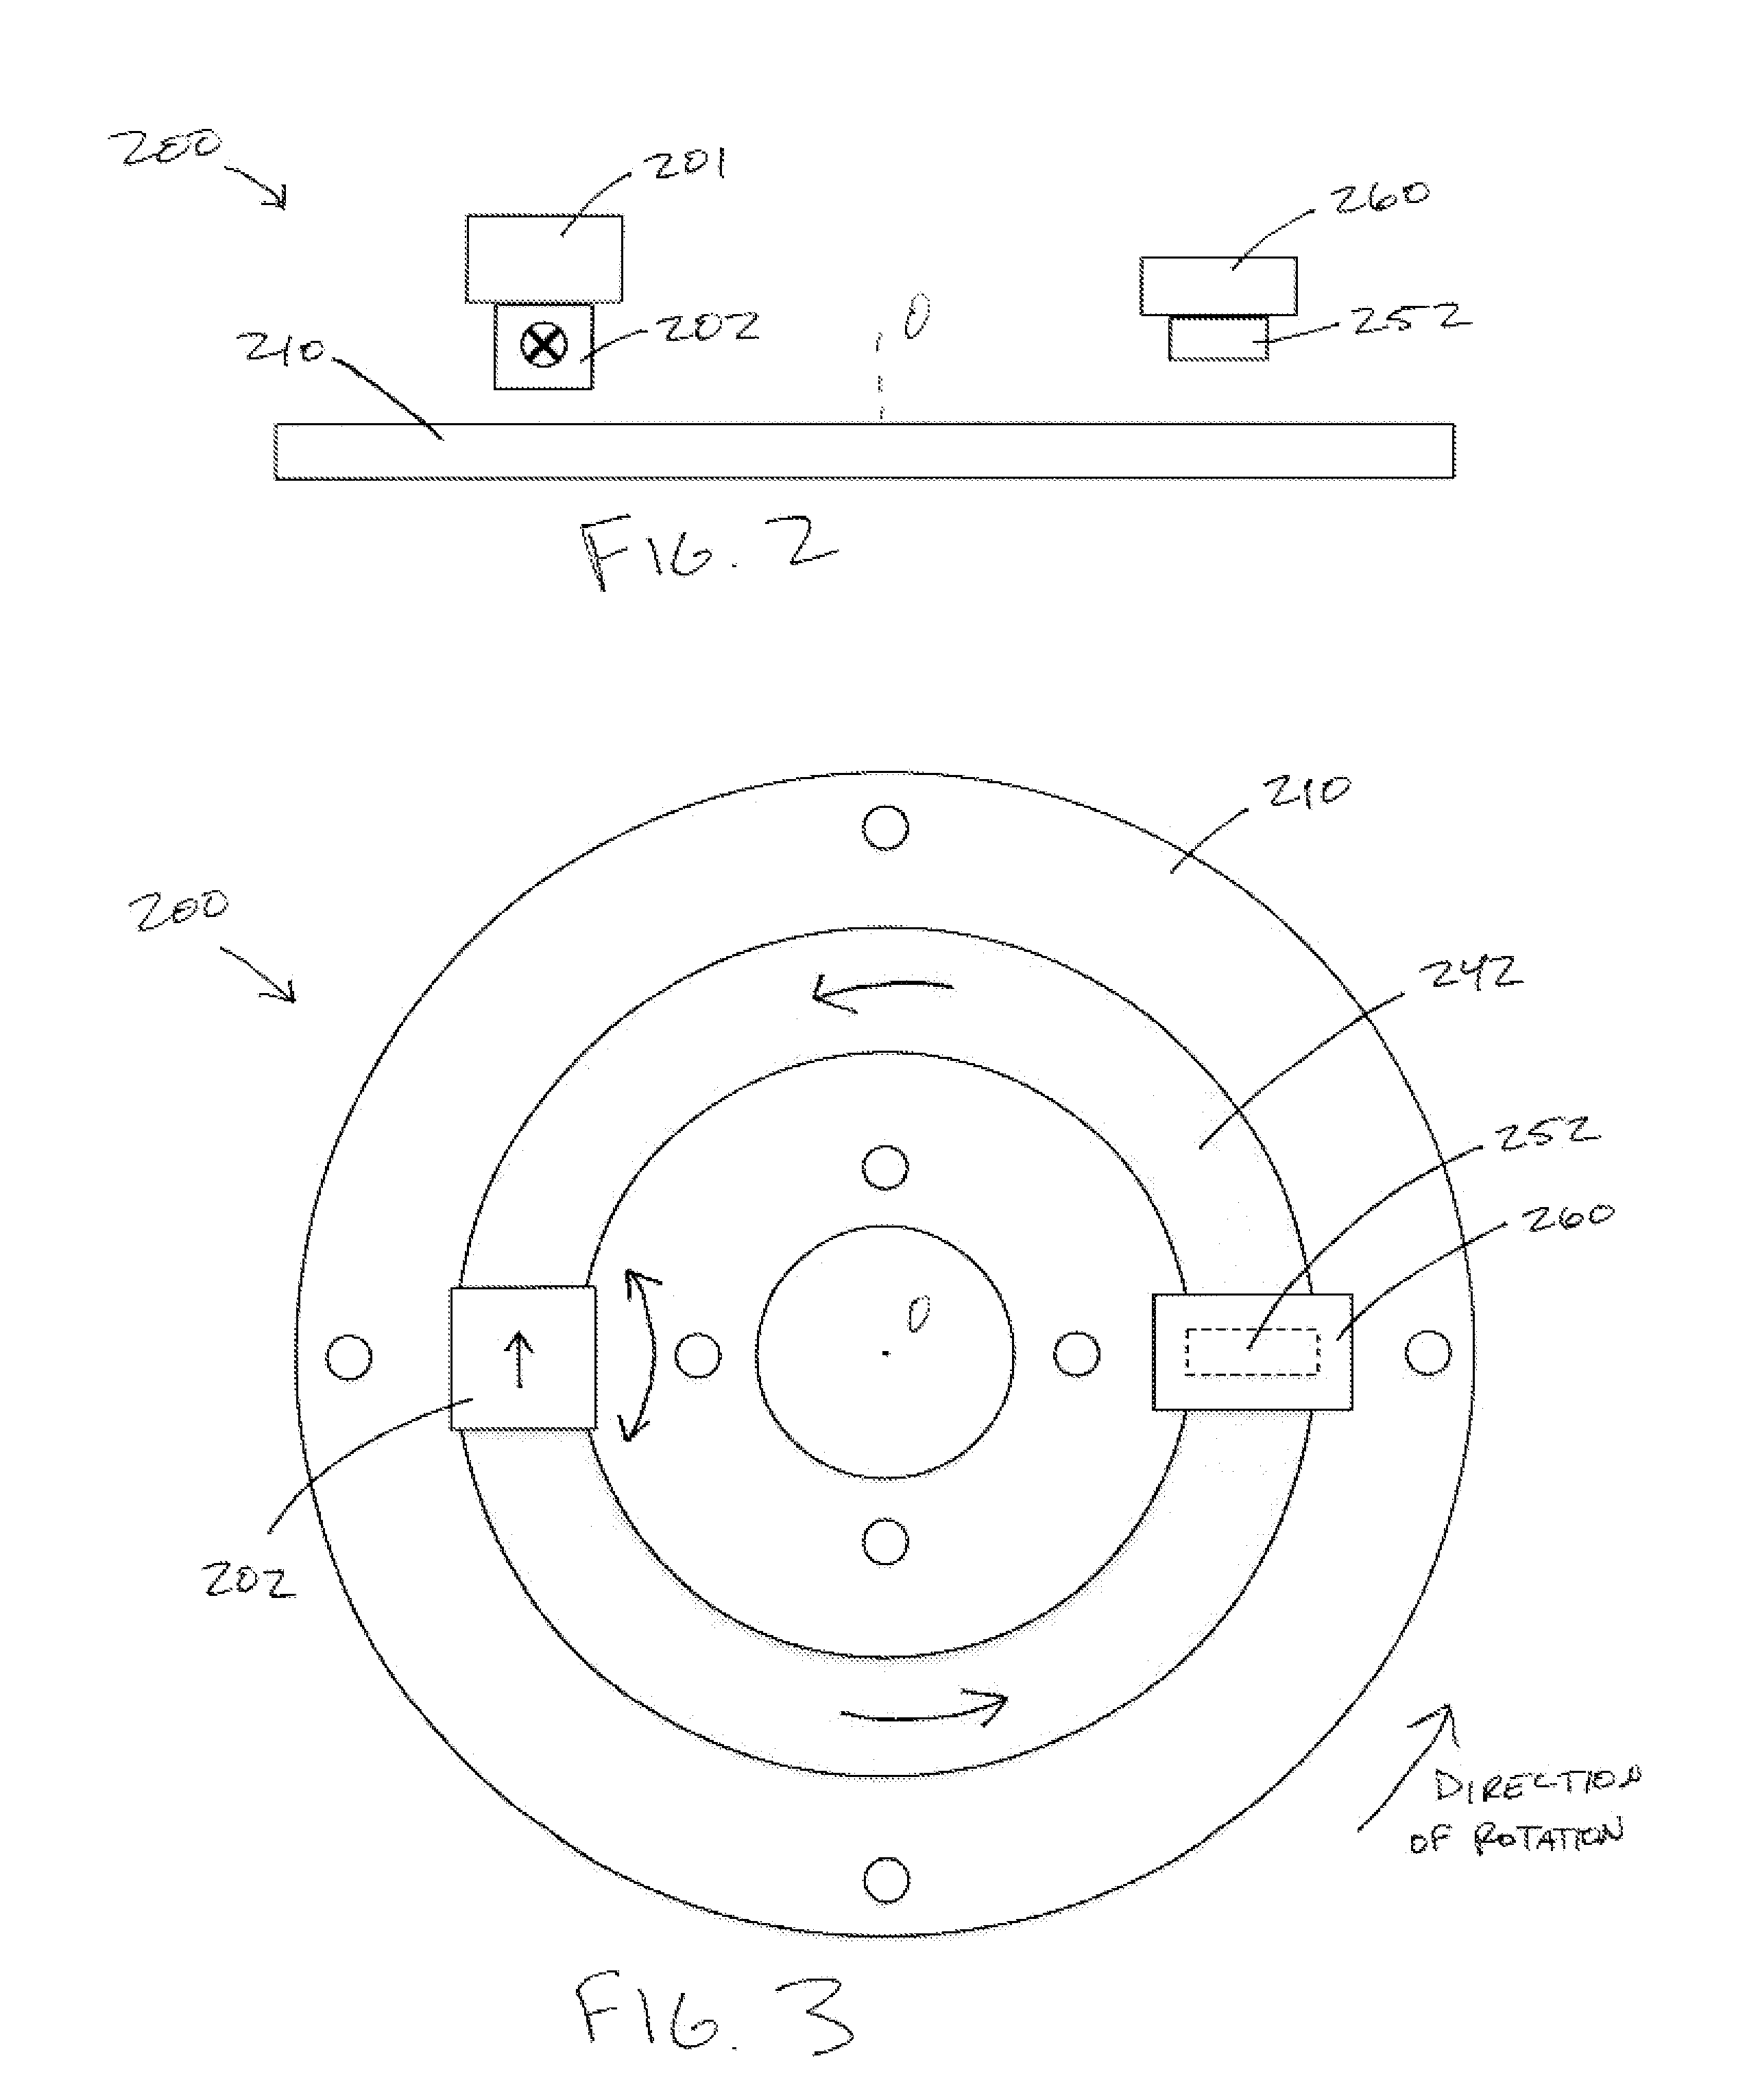 Method of reducing rotation noise in a magnetoelastic torque sensing device